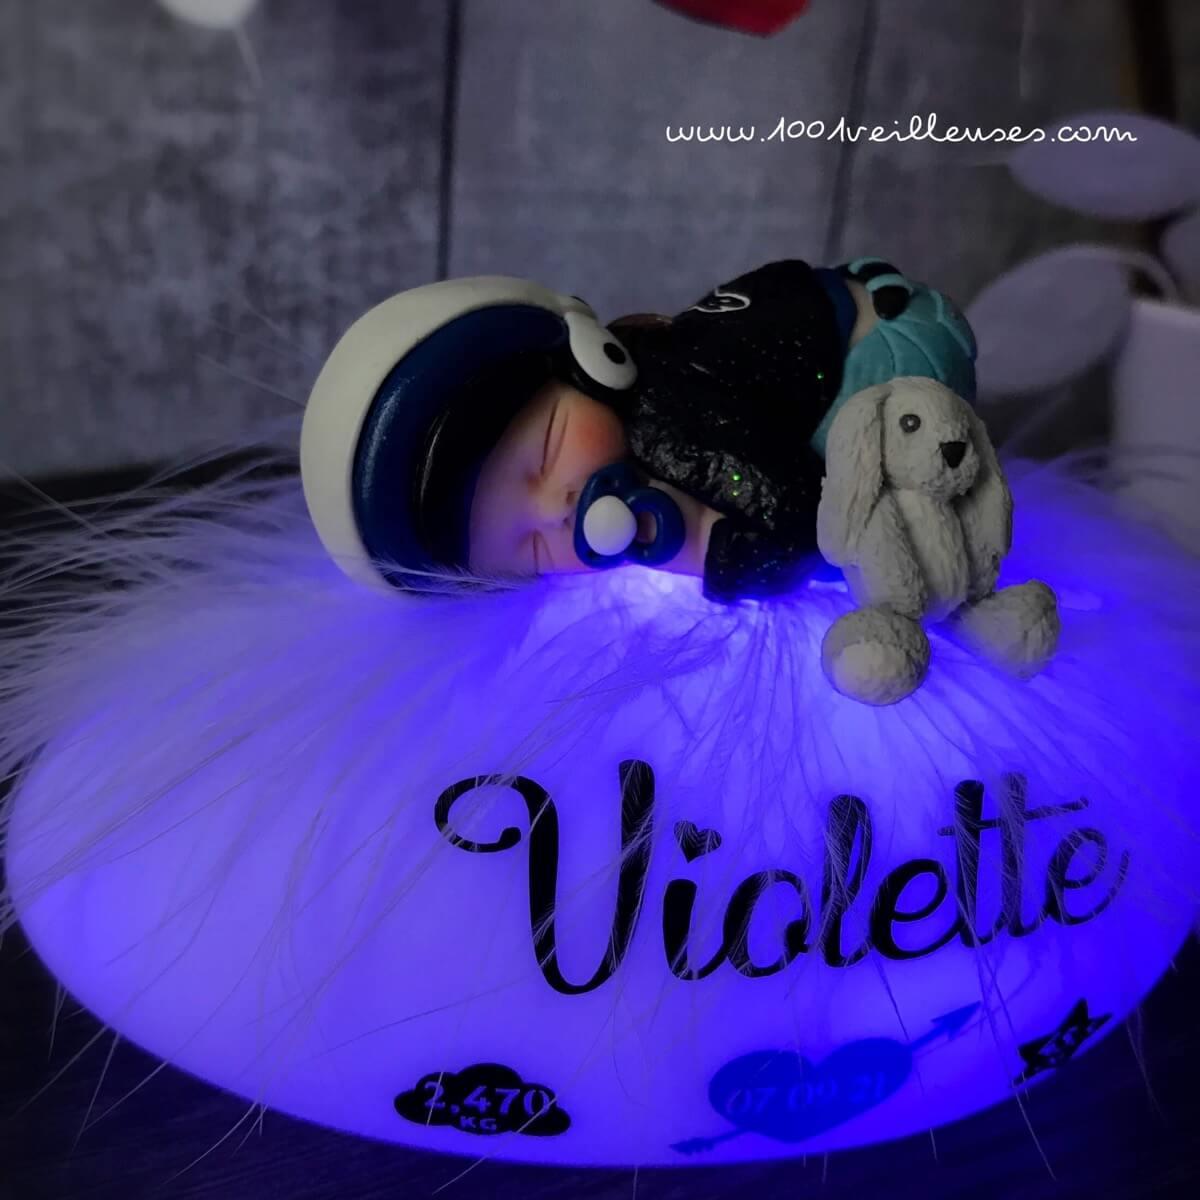 Personalized nightlight with miniature biker baby and cuddly toy, close-up view